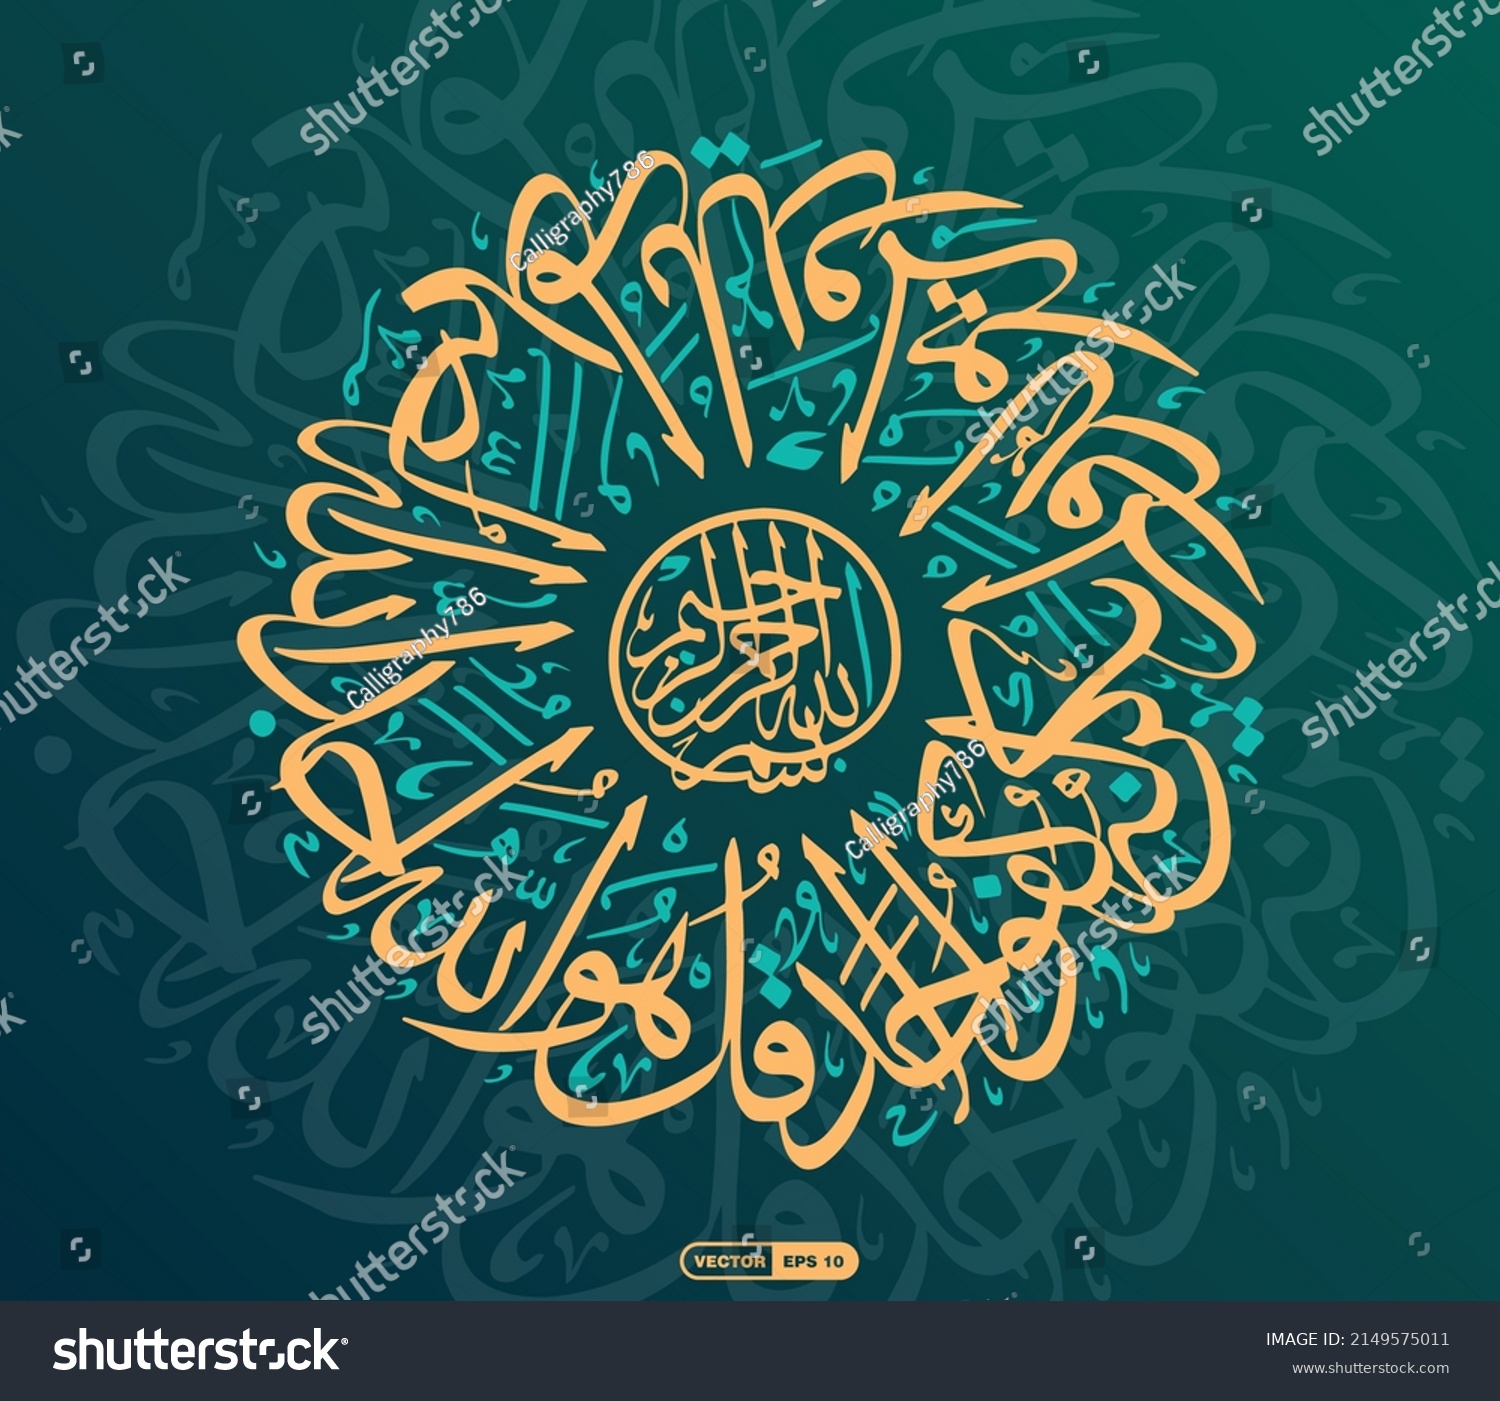 SVG of Circular or radial calligraphy design of Surah Al-Ikhlas [112: 1 to 4] Arabic Qul shareef and its meanings; 